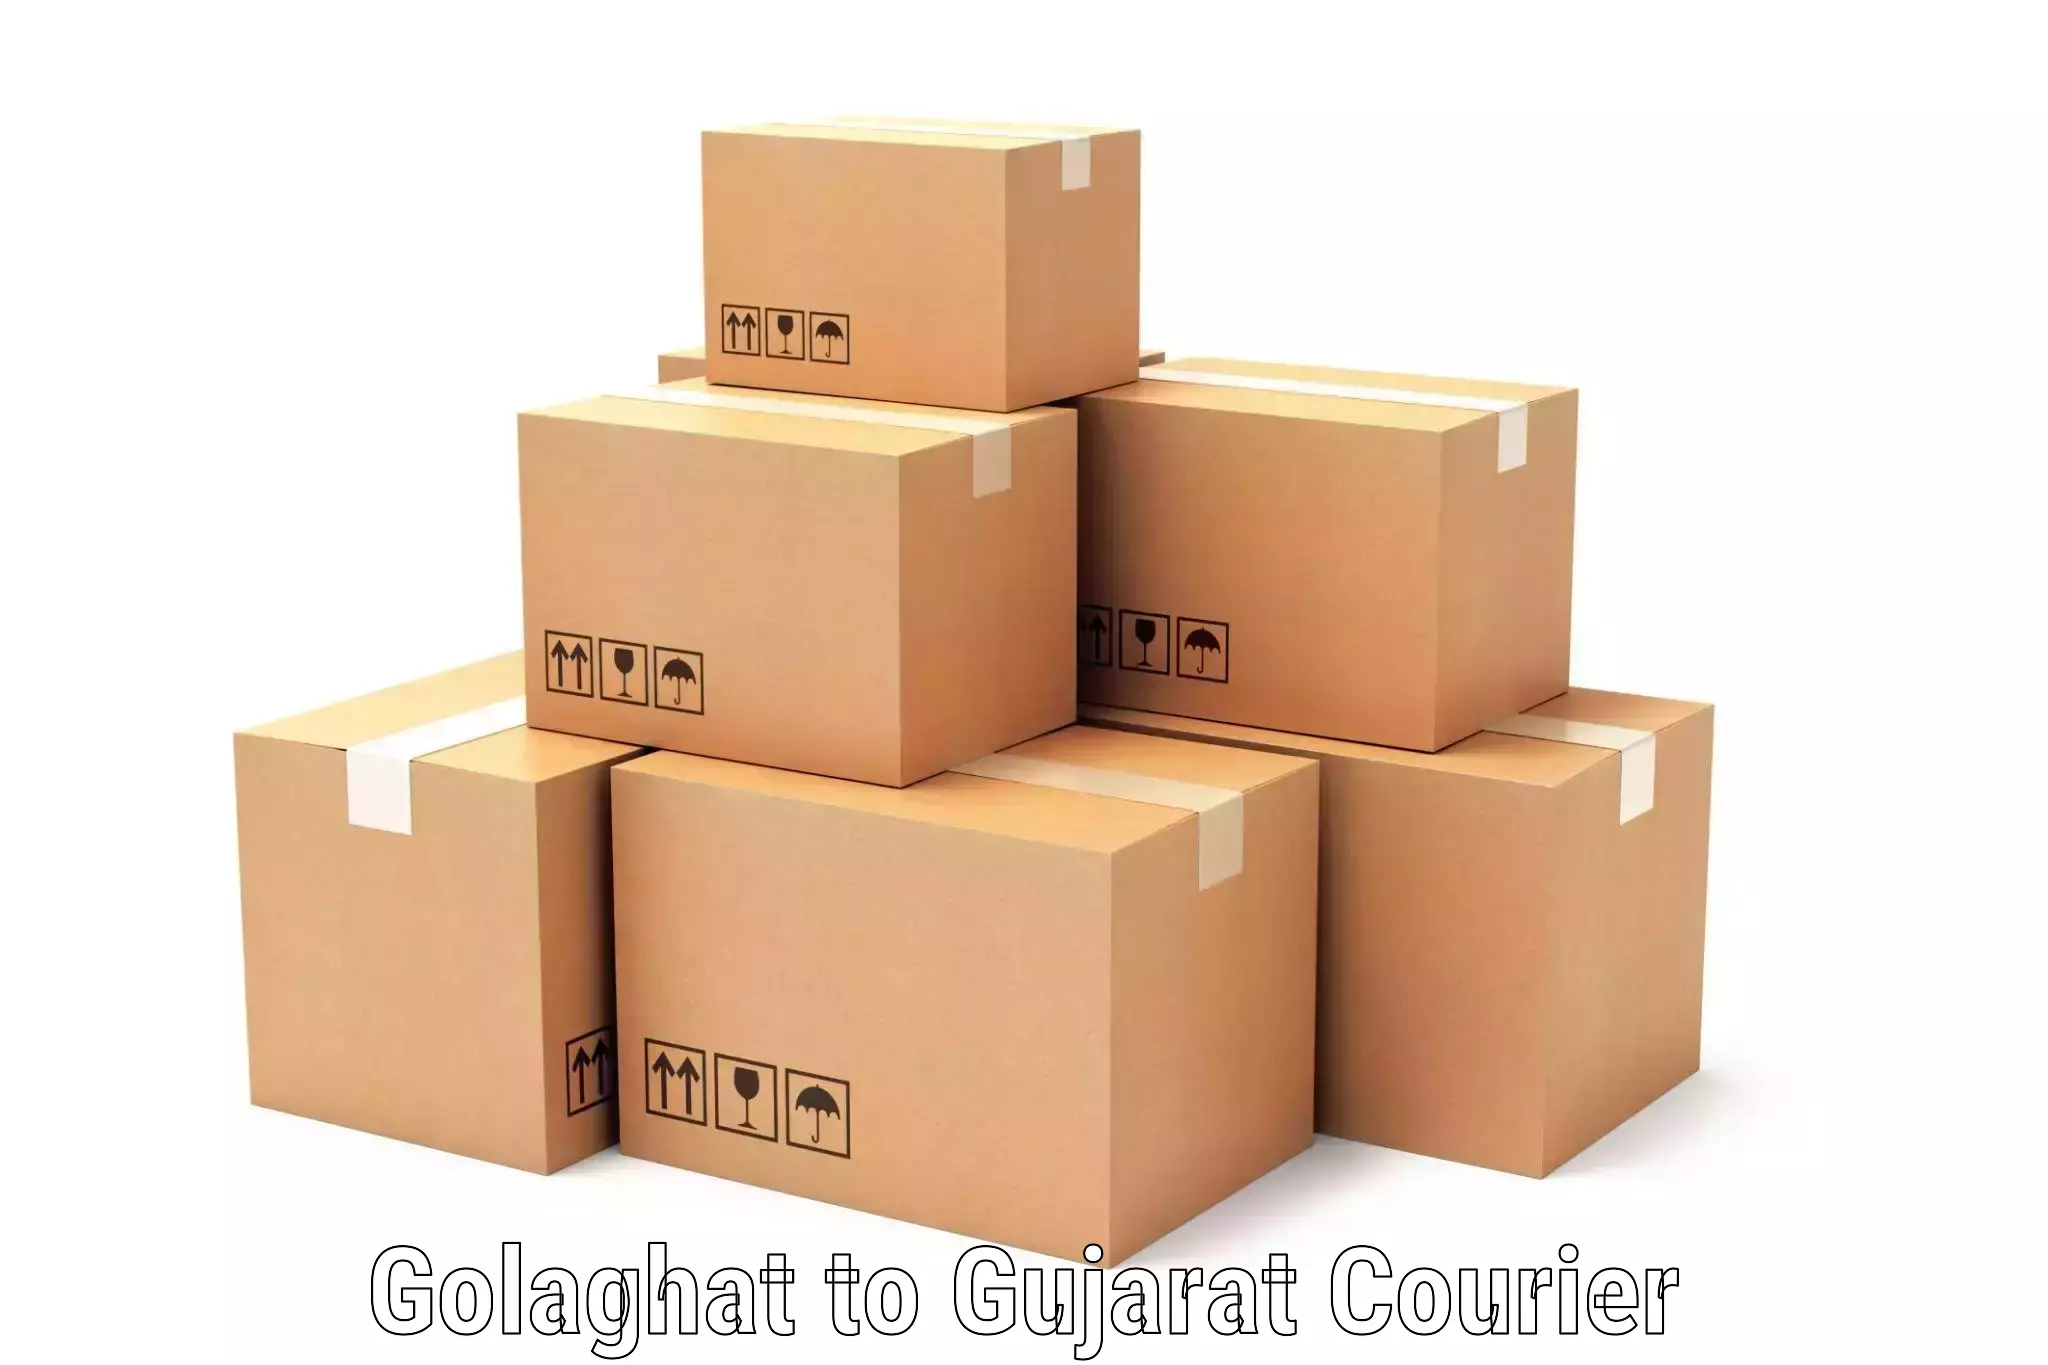 High-priority parcel service Golaghat to Dhrol